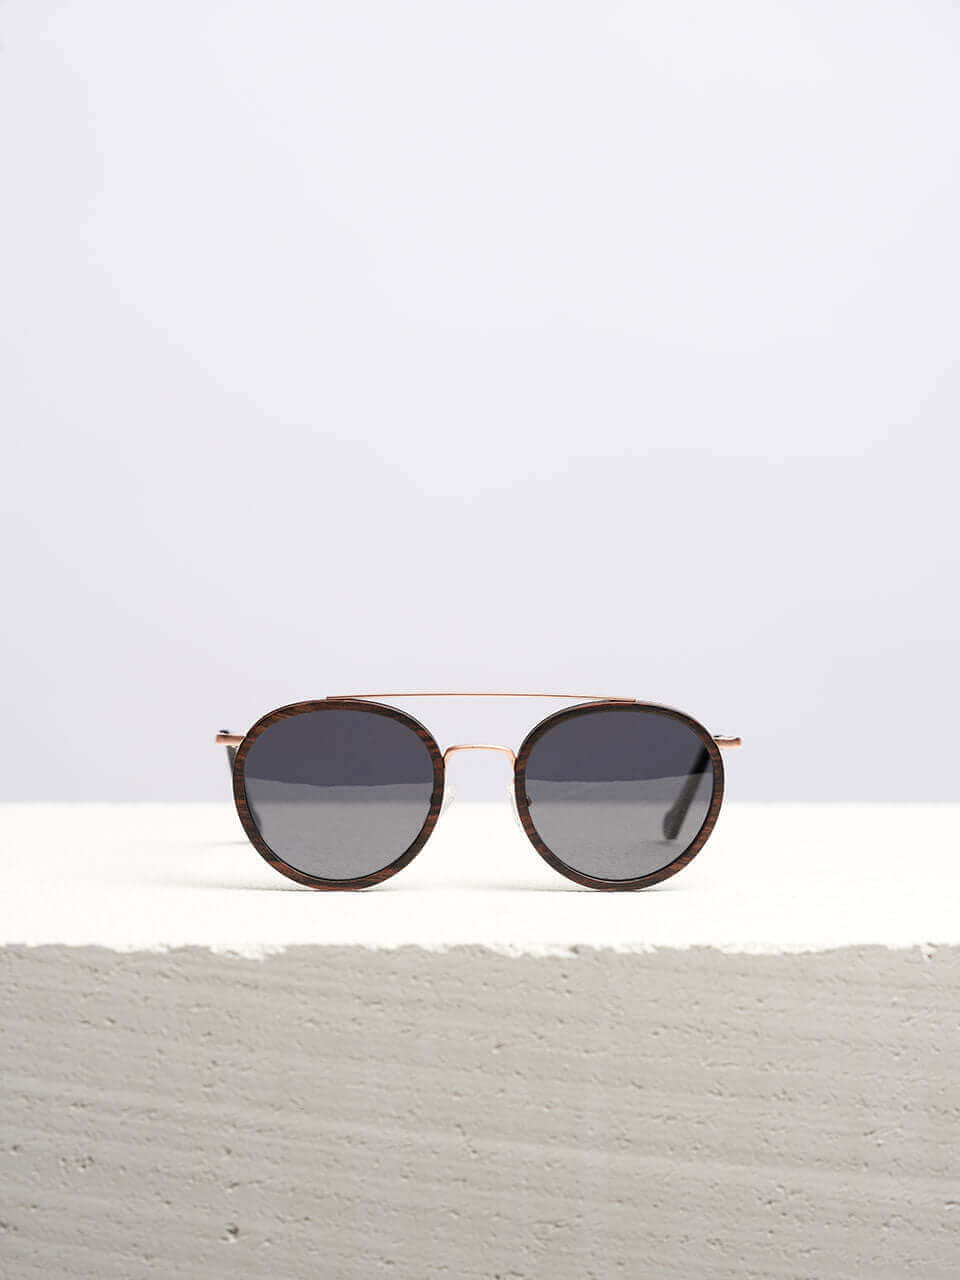 Stylish Wooden Sunglasses kept on a white table